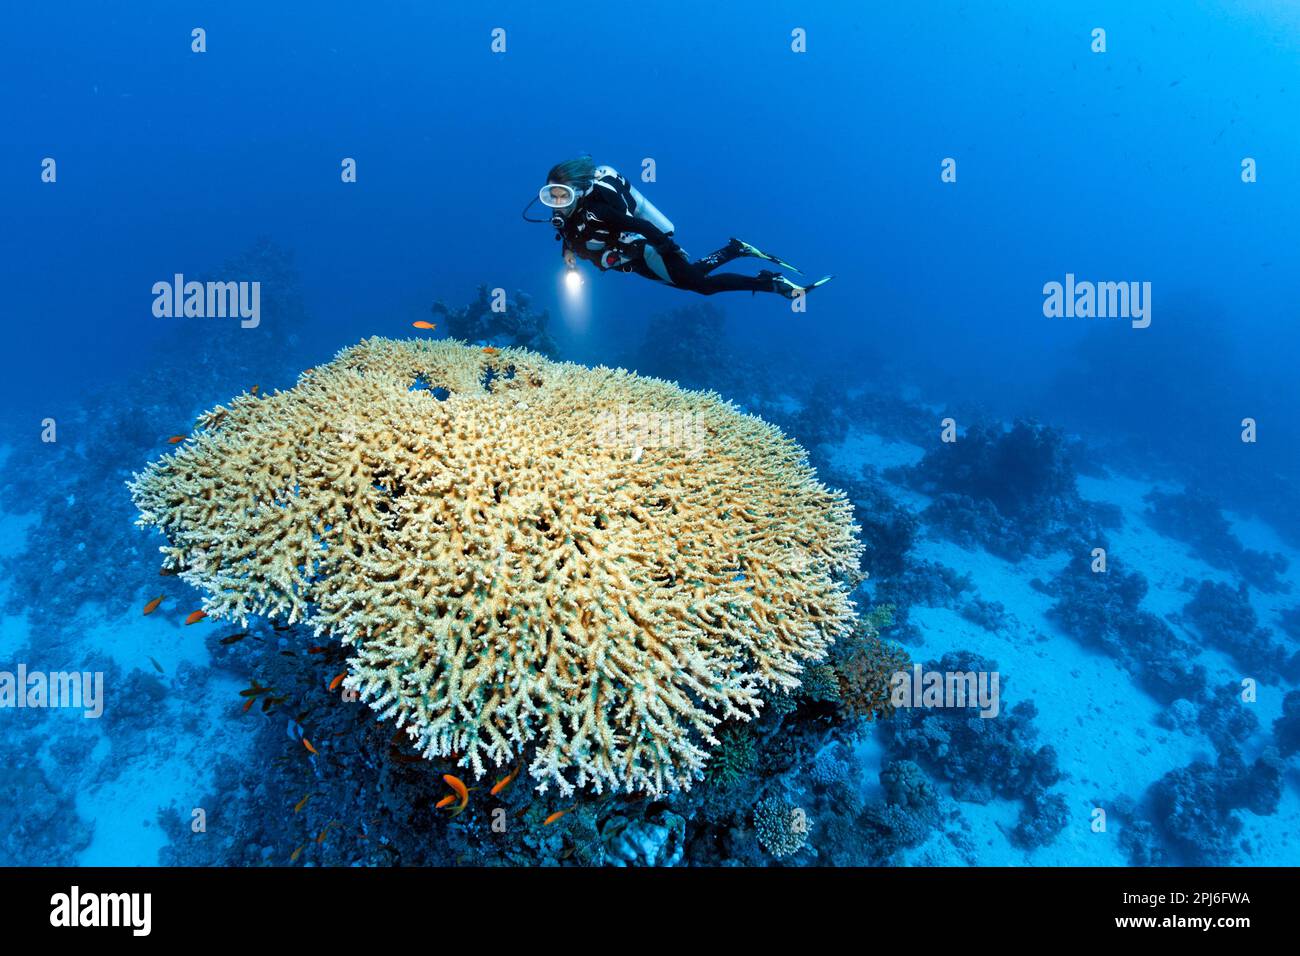 Diver hovering over large Acropora table coral (Acropora acuminata) Red Sea, St. Johns, Marsa Alam, Egypt Stock Photo